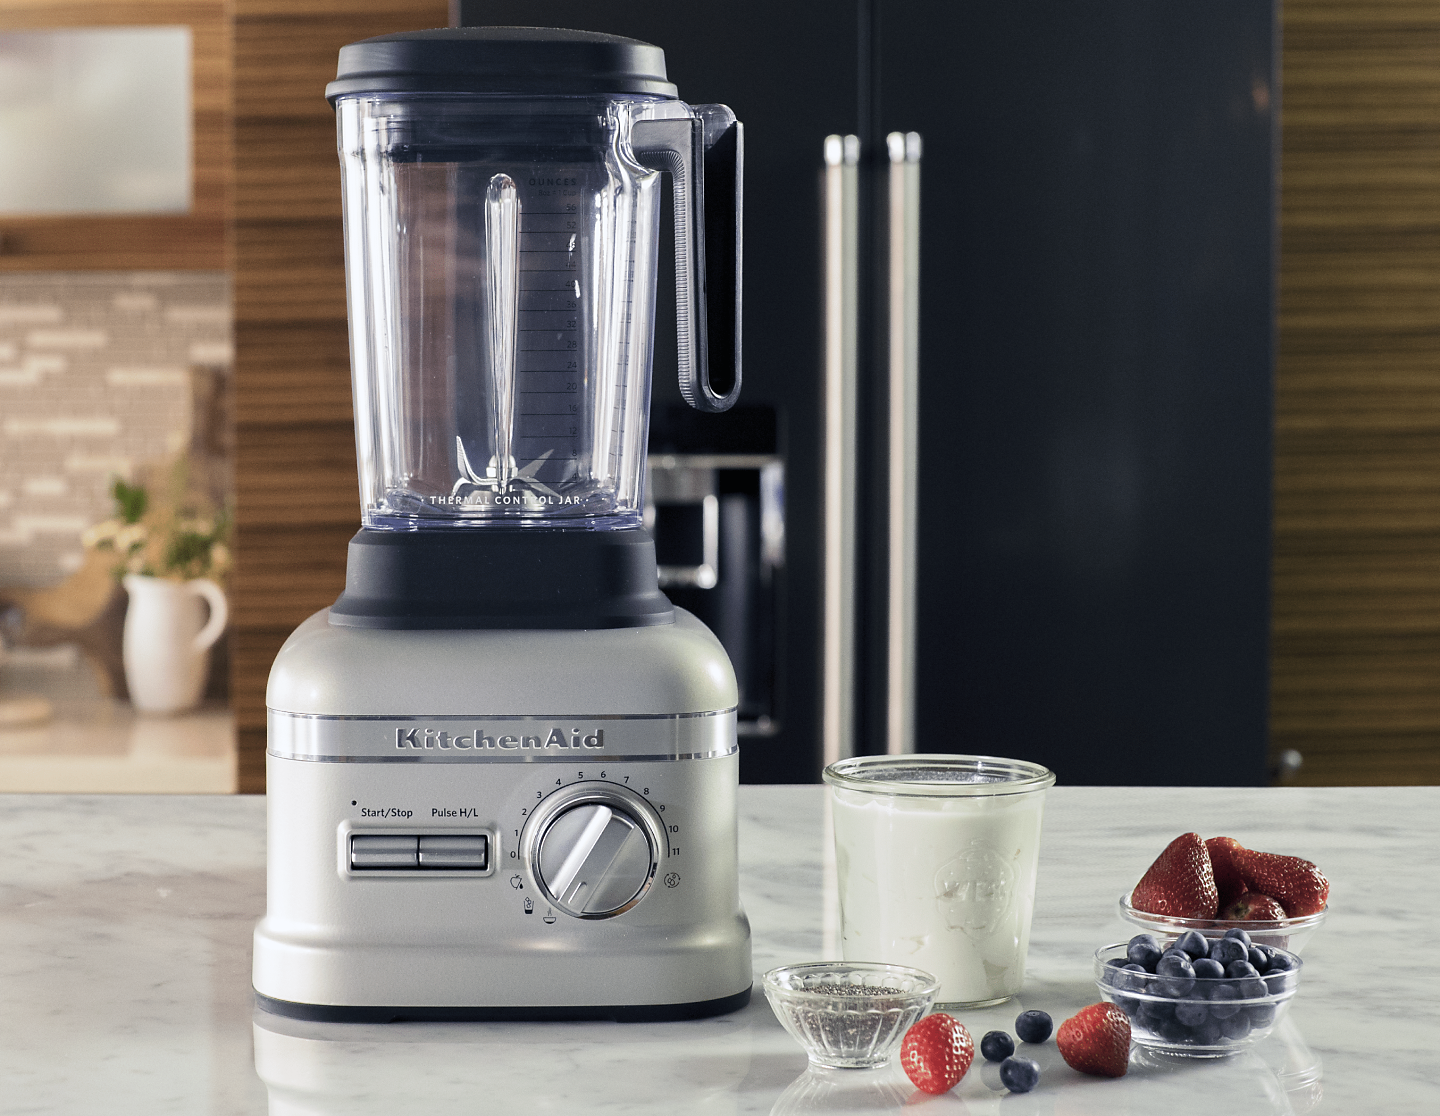 https://kitchenaid-h.assetsadobe.com/is/image/content/dam/business-unit/kitchenaid/en-us/marketing-content/site-assets/page-content/pinch-of-help/how-to-make-whipped-cream-blender/Image_Z_How-to-make-Whipped-Cream-Blender.png?fmt=png-alpha&qlt=85,0&resMode=sharp2&op_usm=1.75,0.3,2,0&scl=1&constrain=fit,1